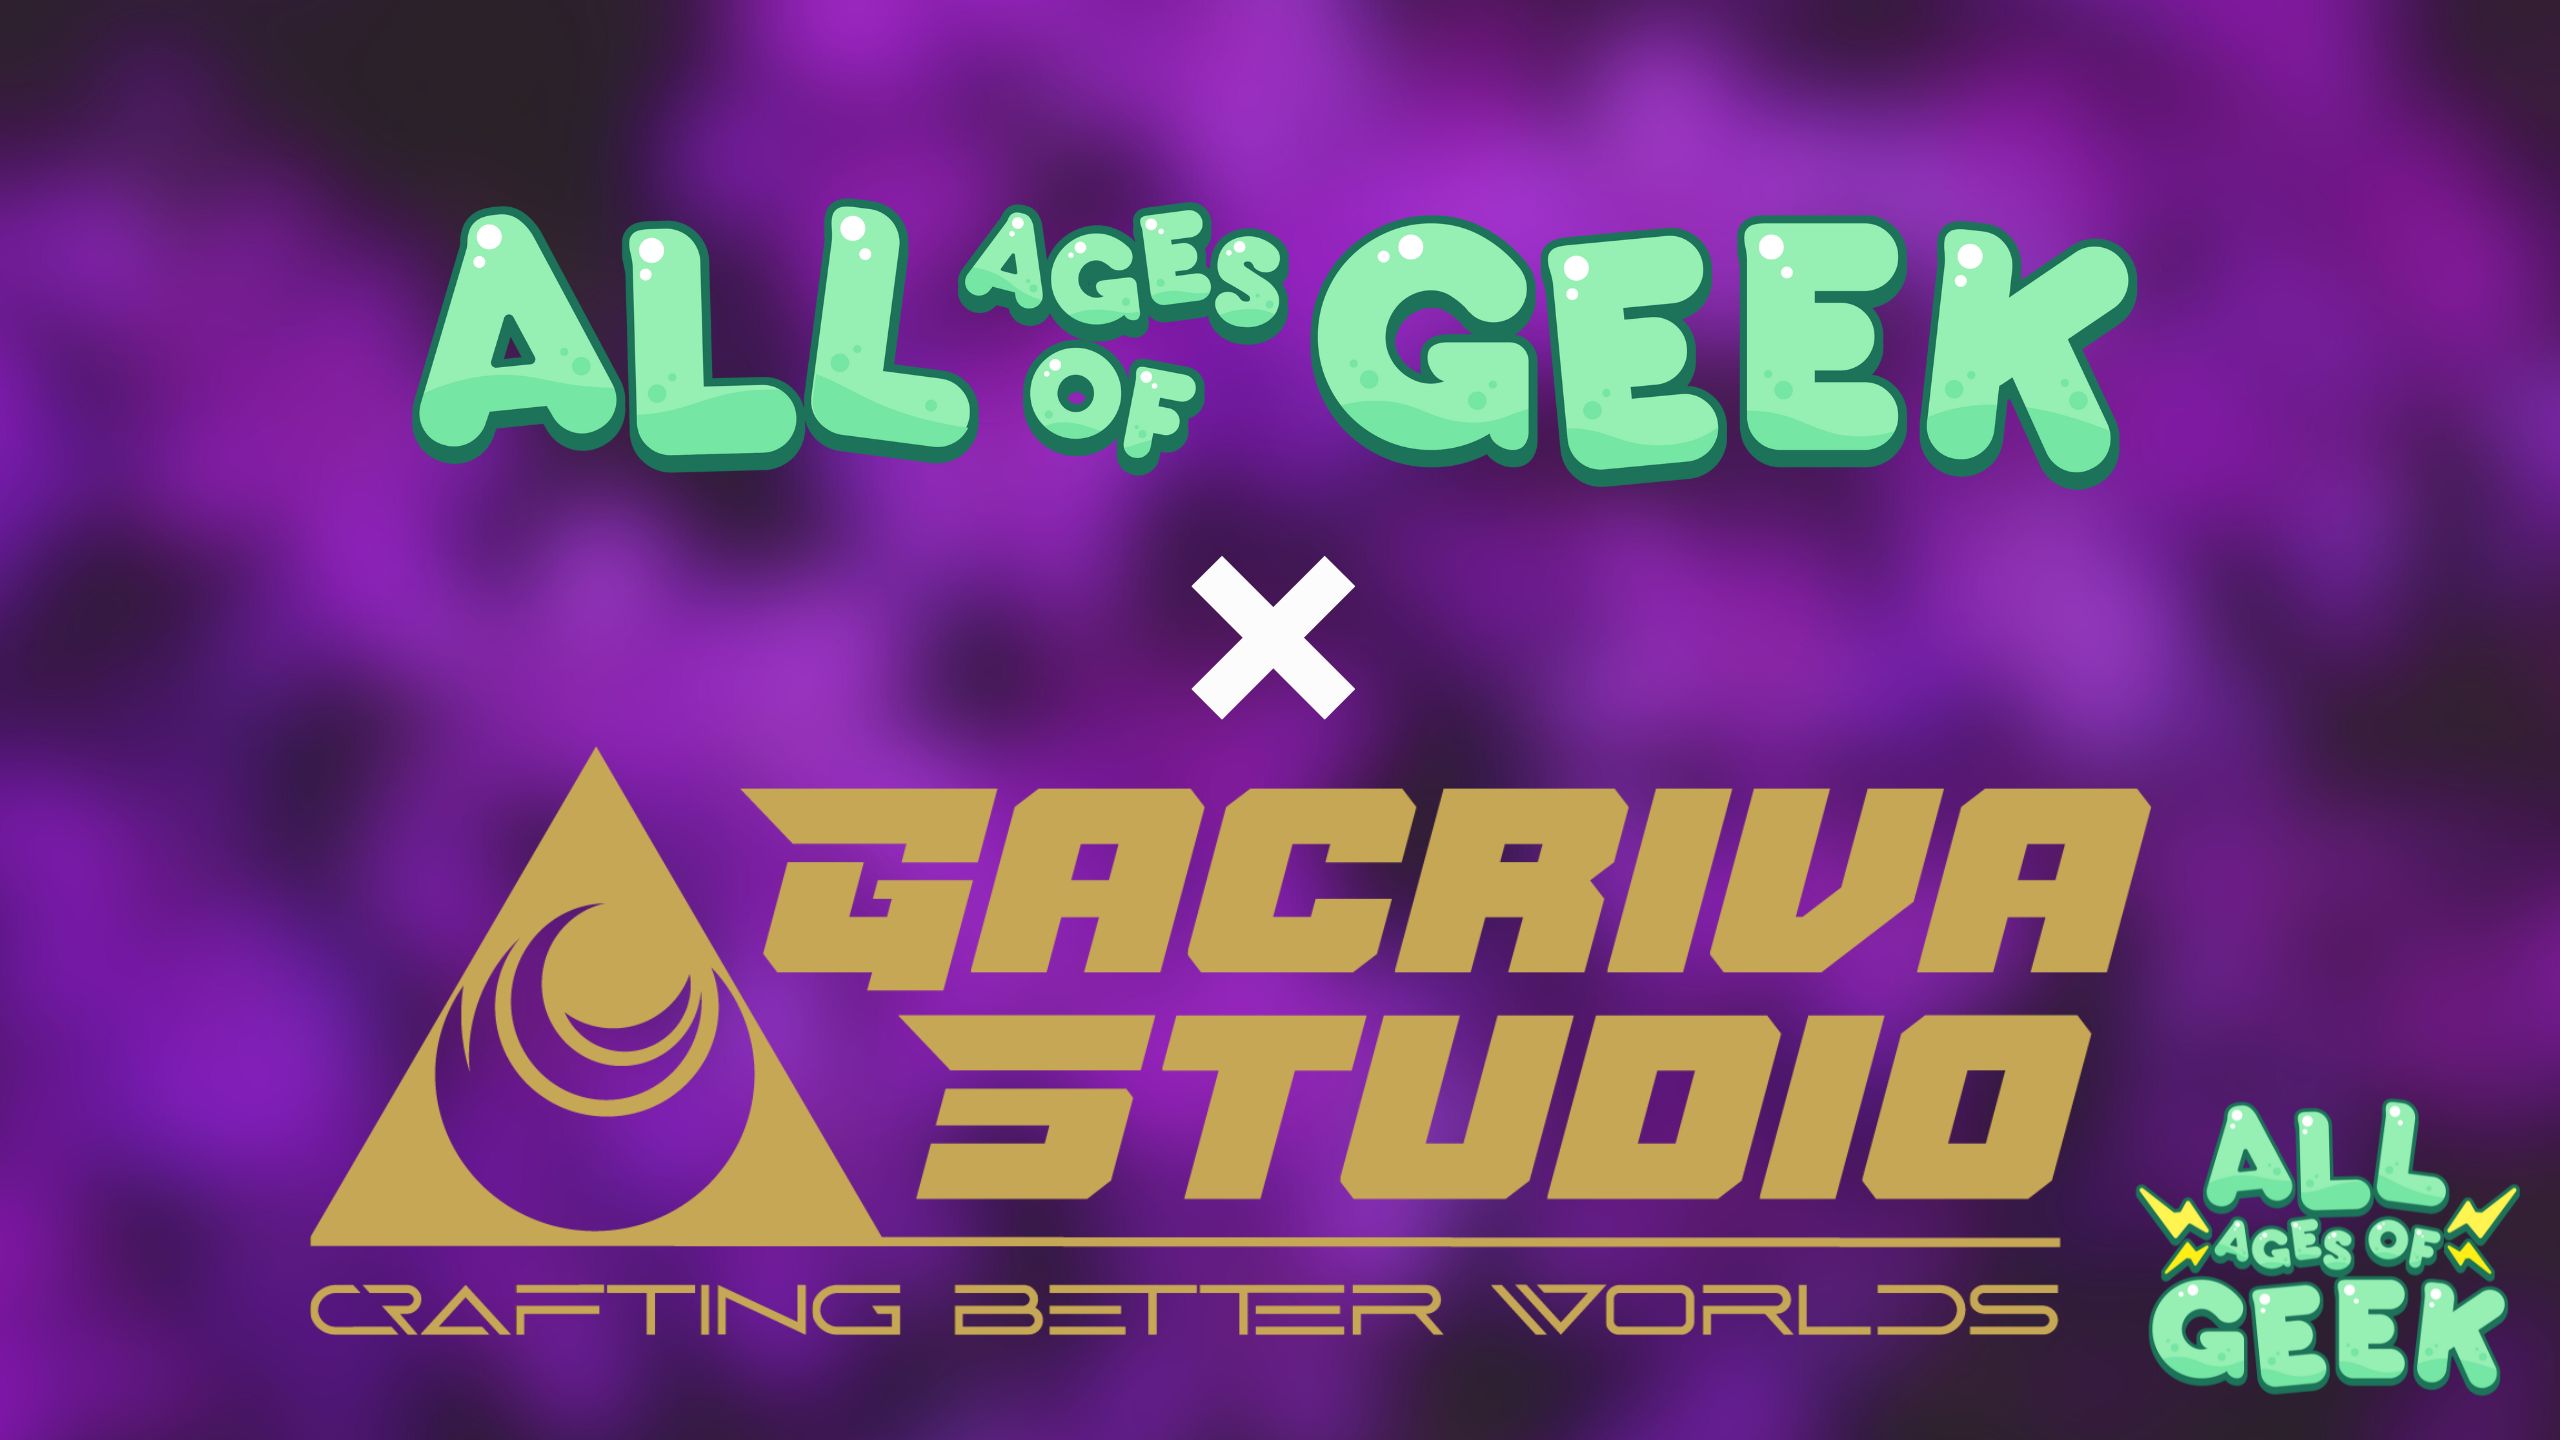 All Ages of Geek and Gacriva Studio Announce Exciting New Partnership!